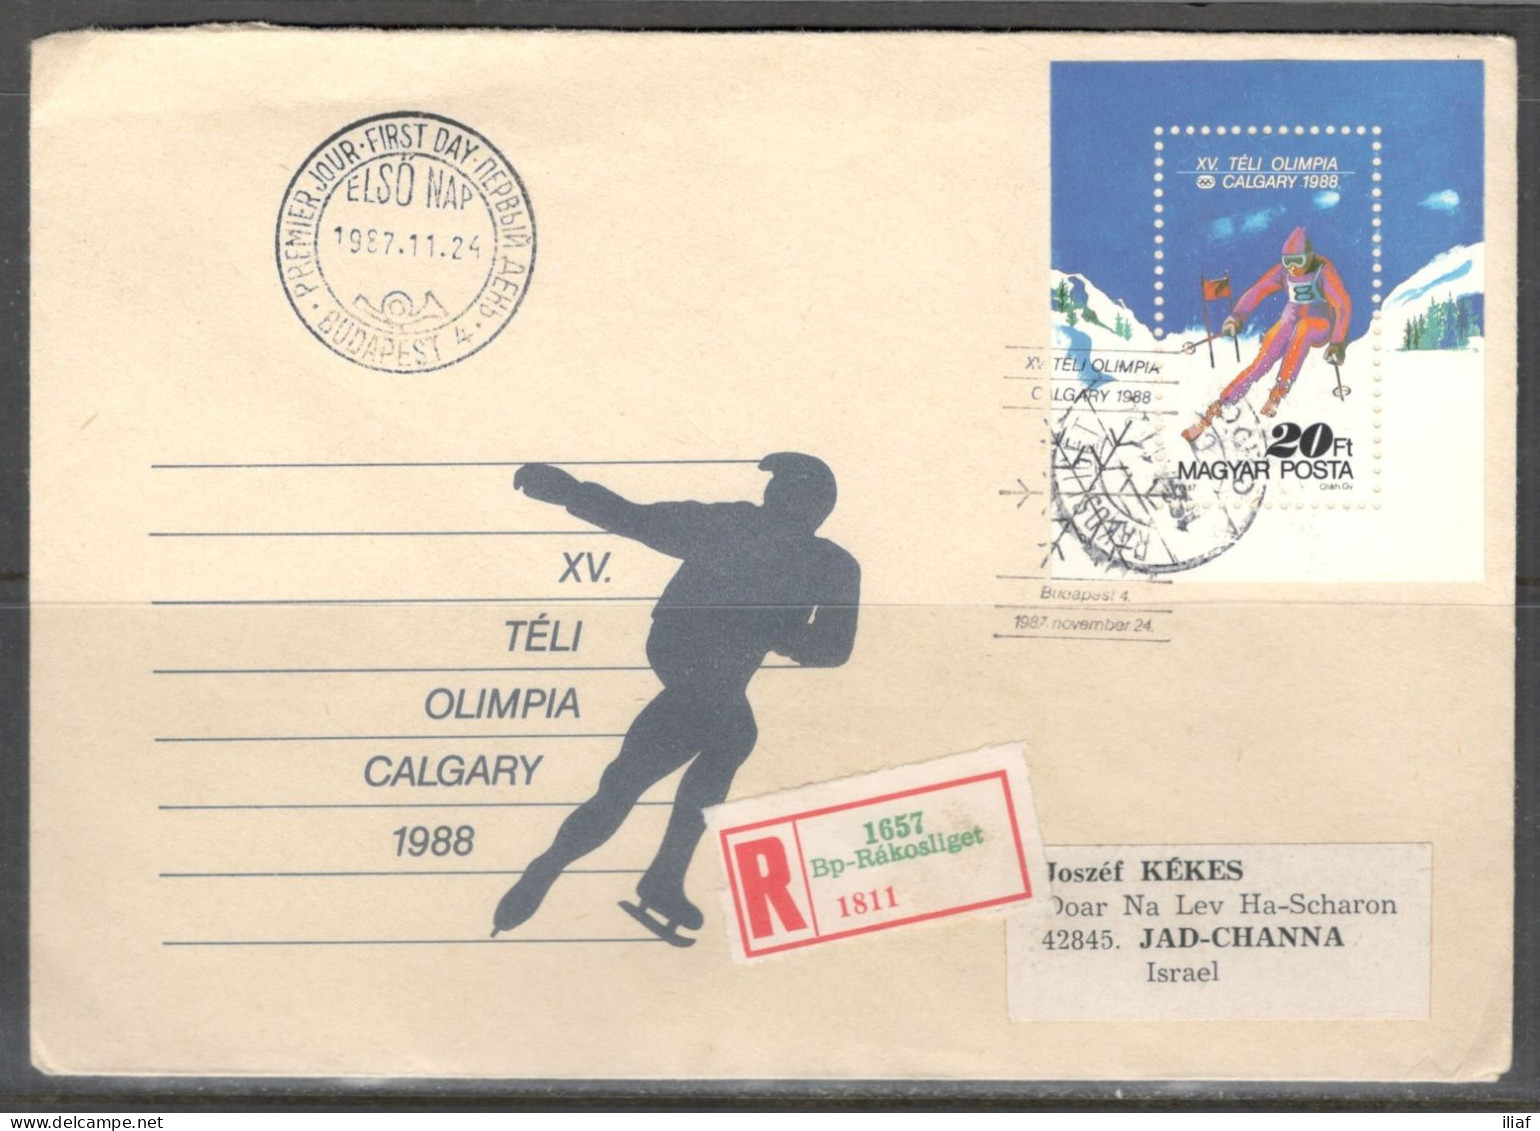 Hungary FDC Sc. 3094-3100. The 1988 Winter Olympics - The XV Olympic Winter Games. 3 FDC Covers.  FDC Cancellation On Sp - FDC